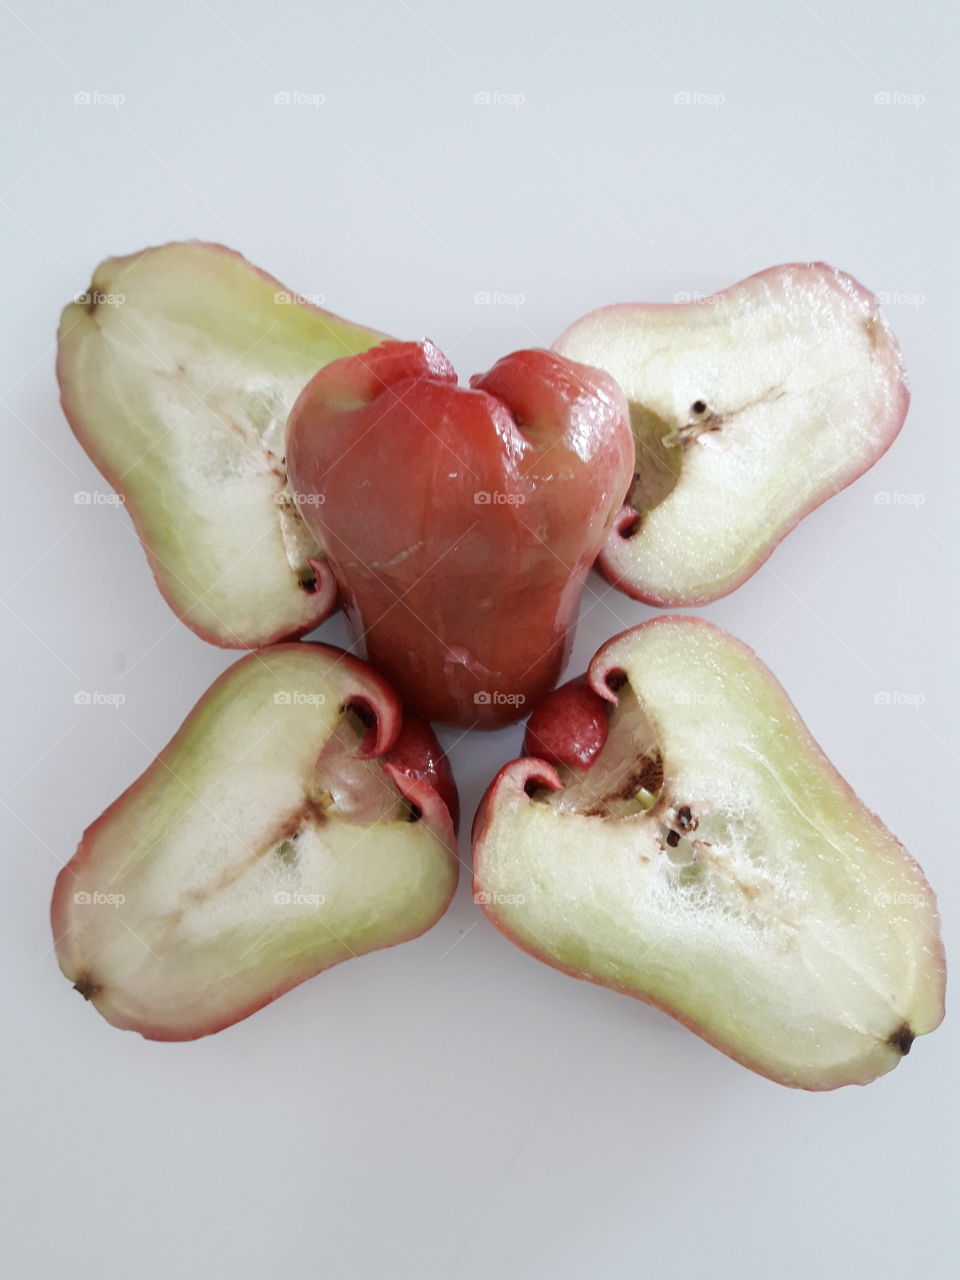 rose apple fruit. The health benefit of rose apples include their ability to detoxify the liver, improve digestion, protect against diabetes, boost the immune system, lower cholesterol, prevent cancer, eliminate fungals & bacterial infection.